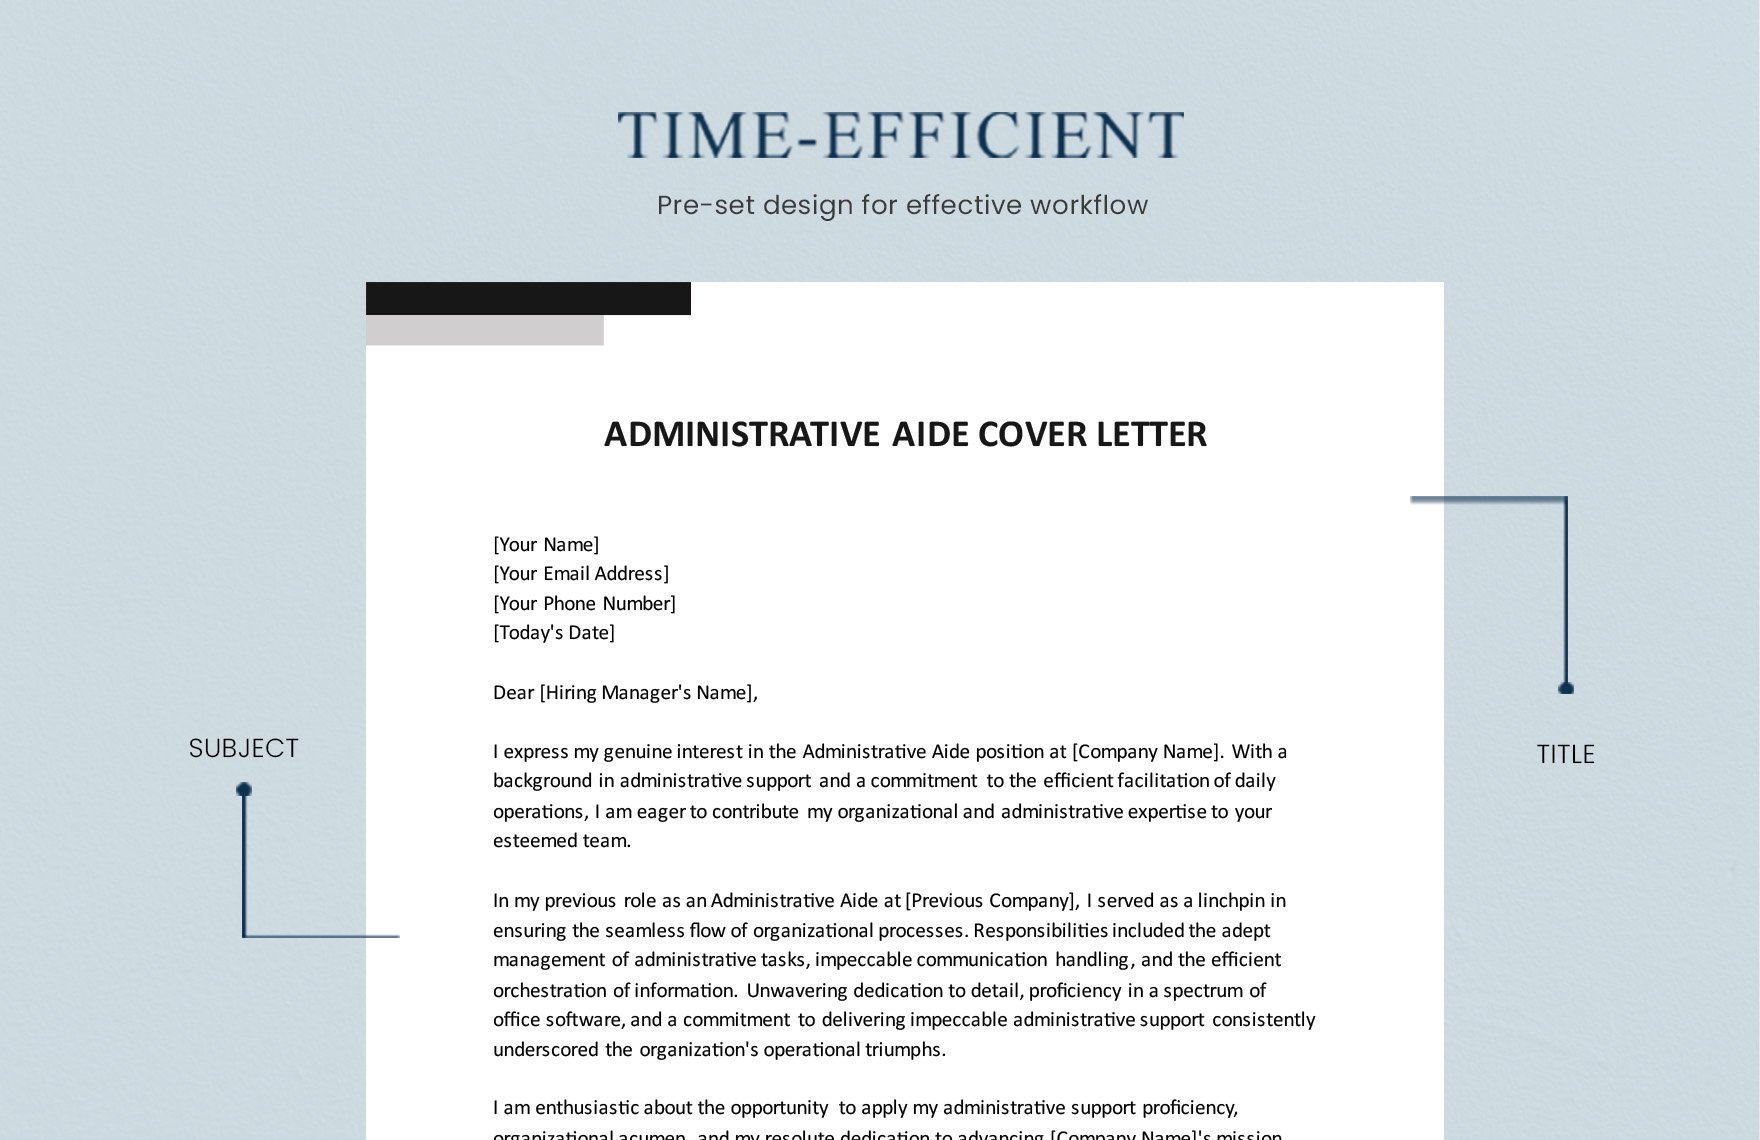 Administrative Aide Cover Letter